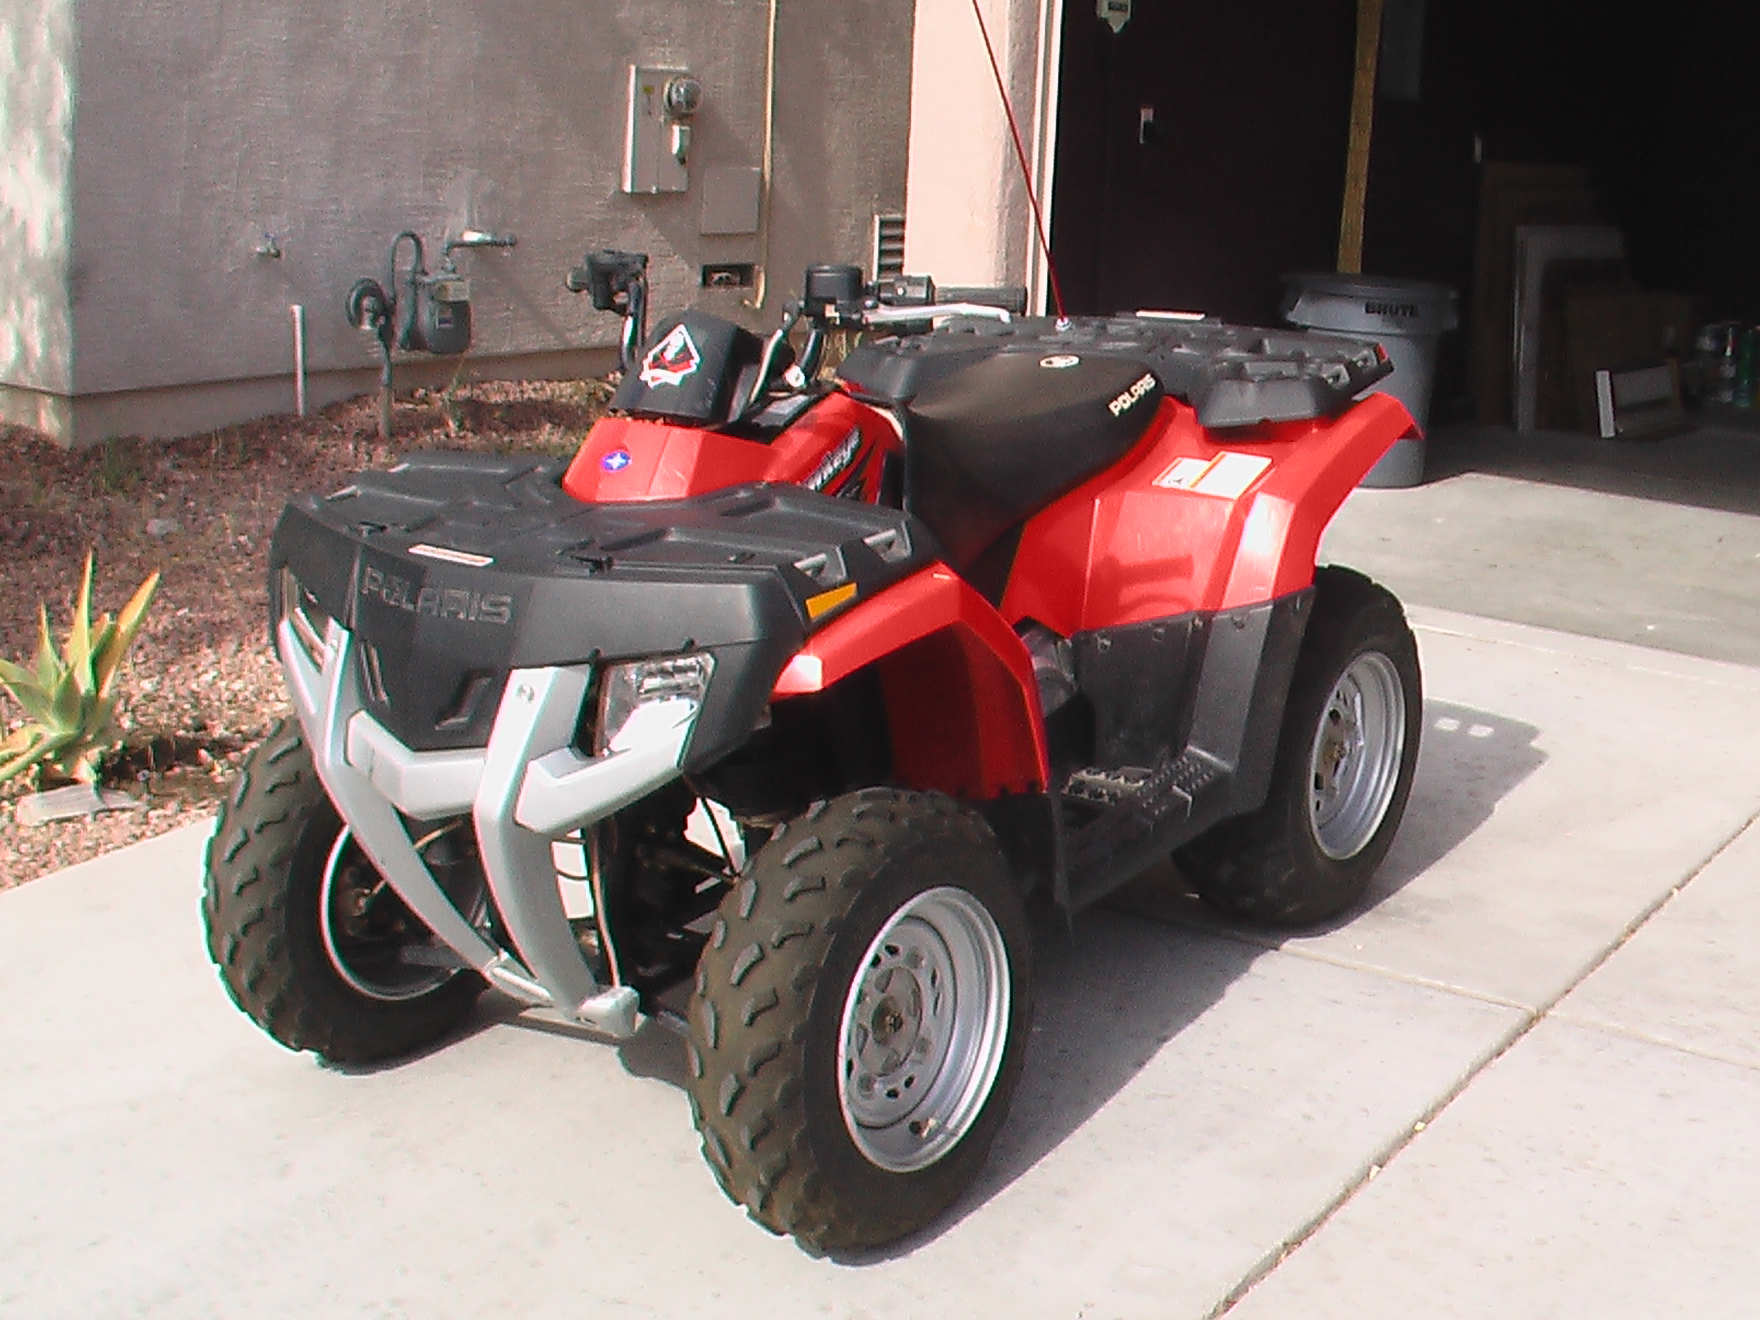 06 Polaris Hawkeye 2x4 For Sale Atv S Motorcycles For Sale Dumont Dune Riders